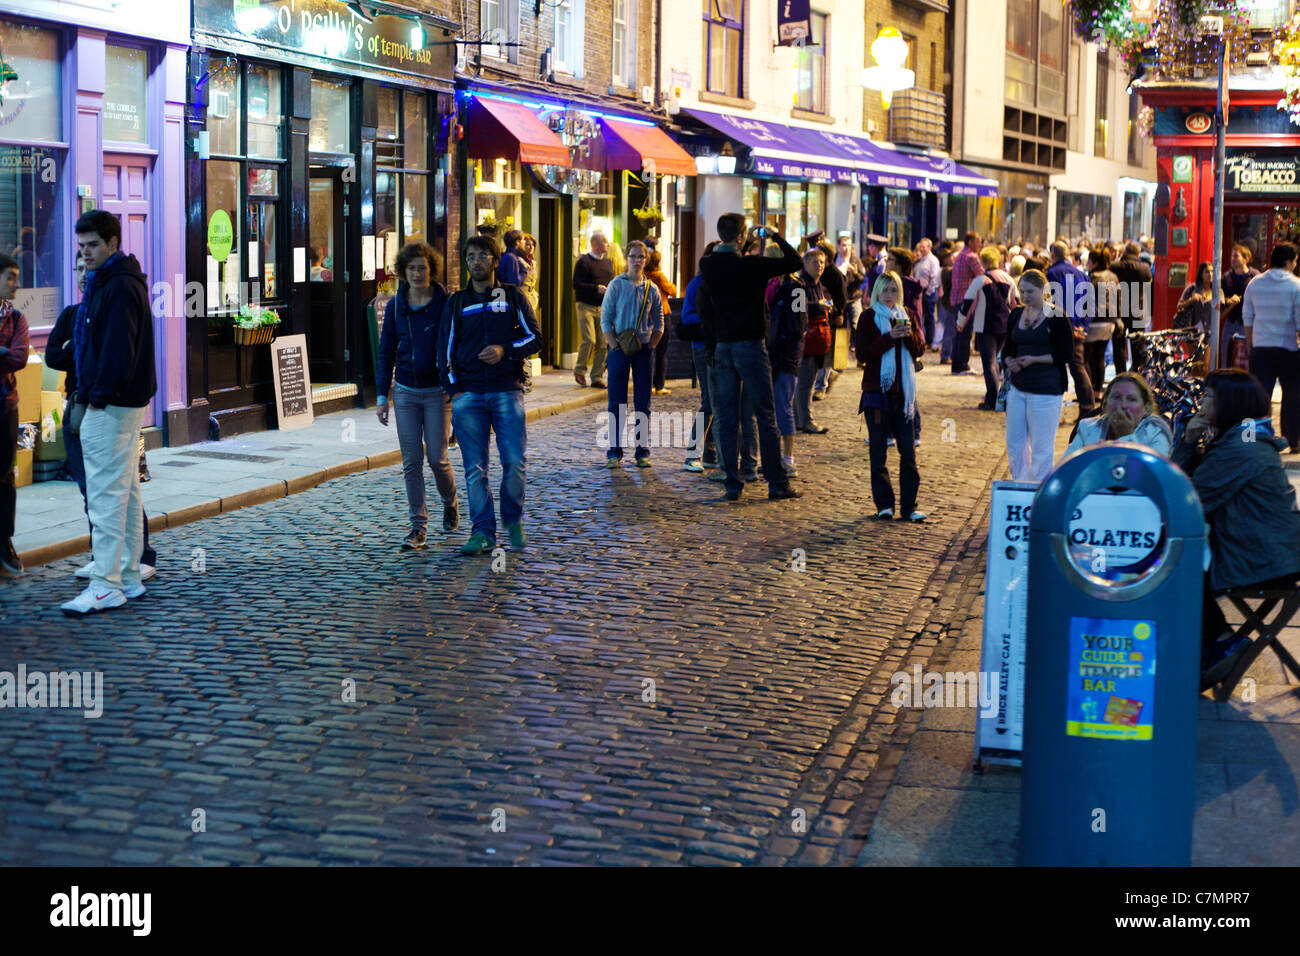 People walking in Temple Bar area of Dublin at night Stock Photo